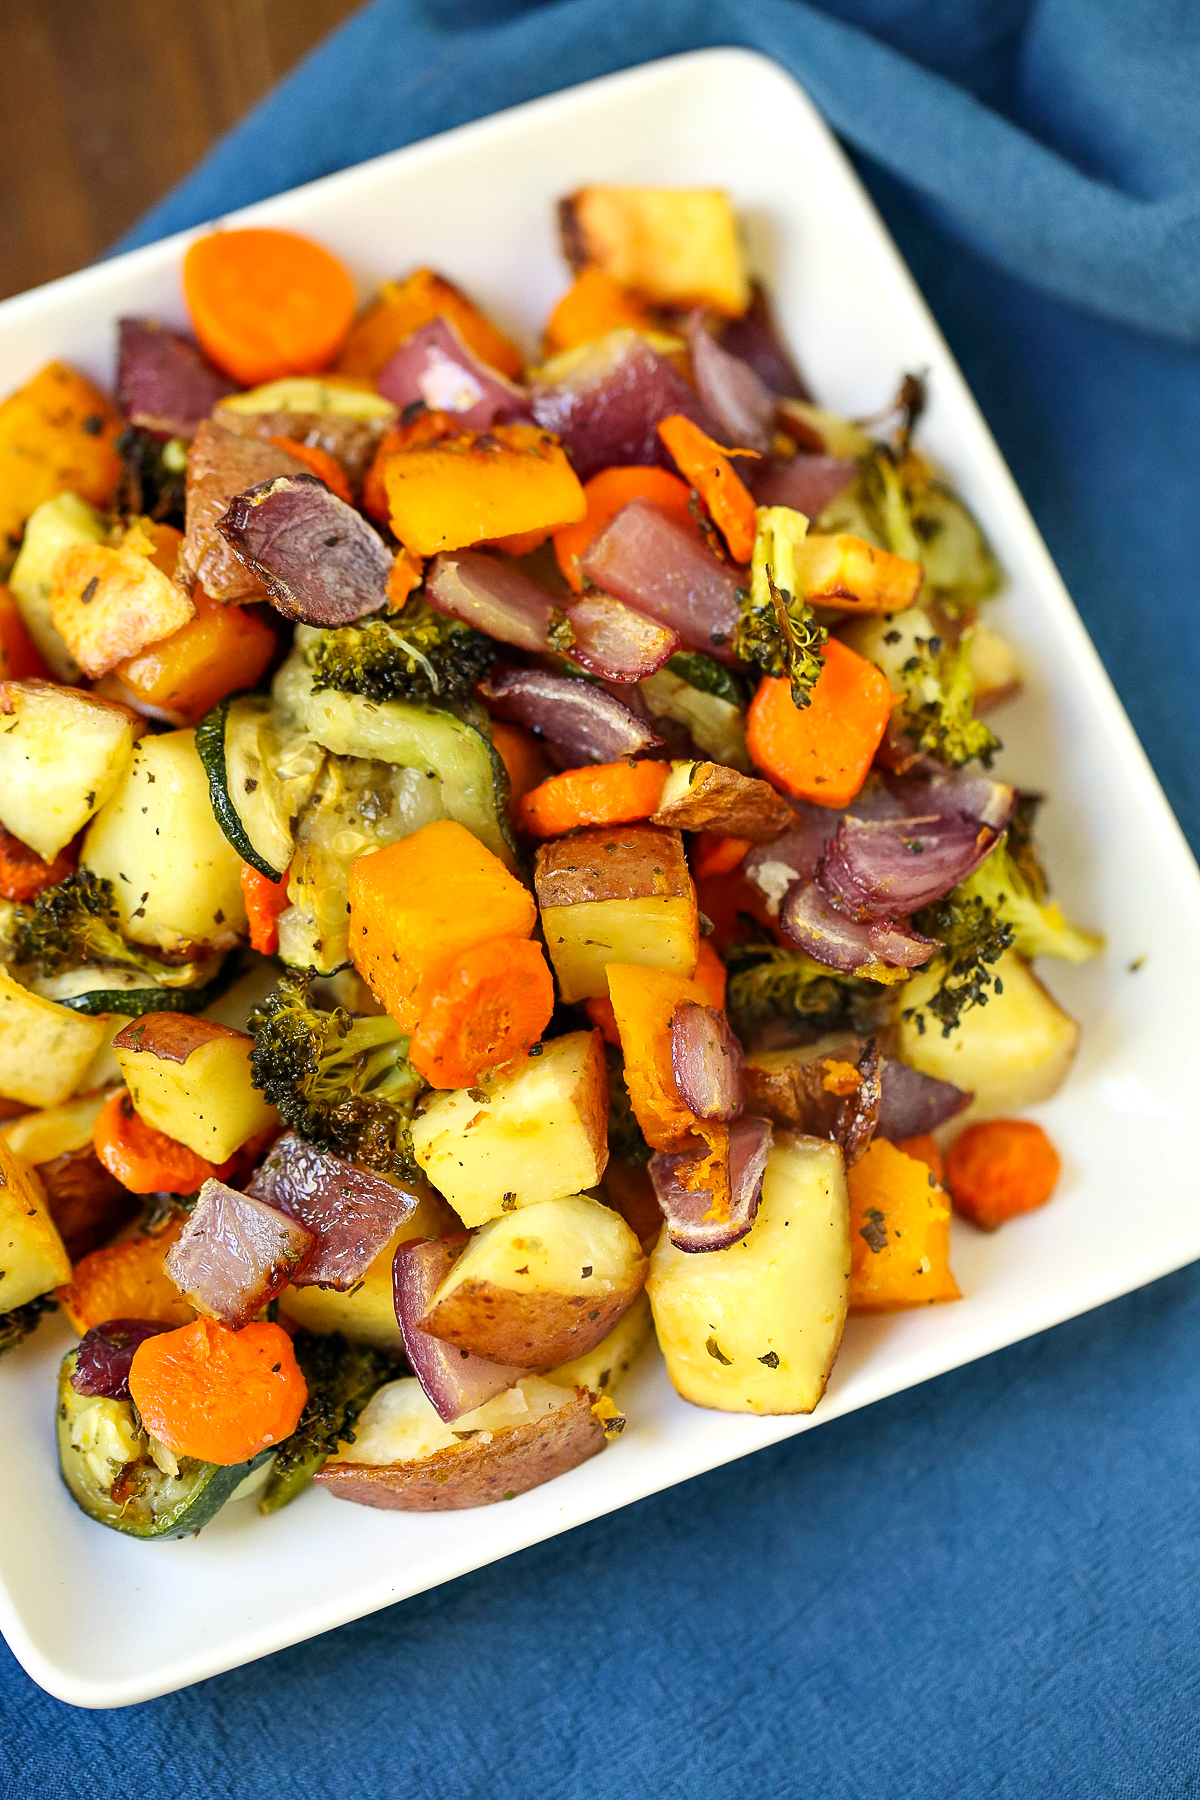 Oven-roasted vegetables are a great side dish for any meal, and this recipe is an easy and delicious way to prepare them.